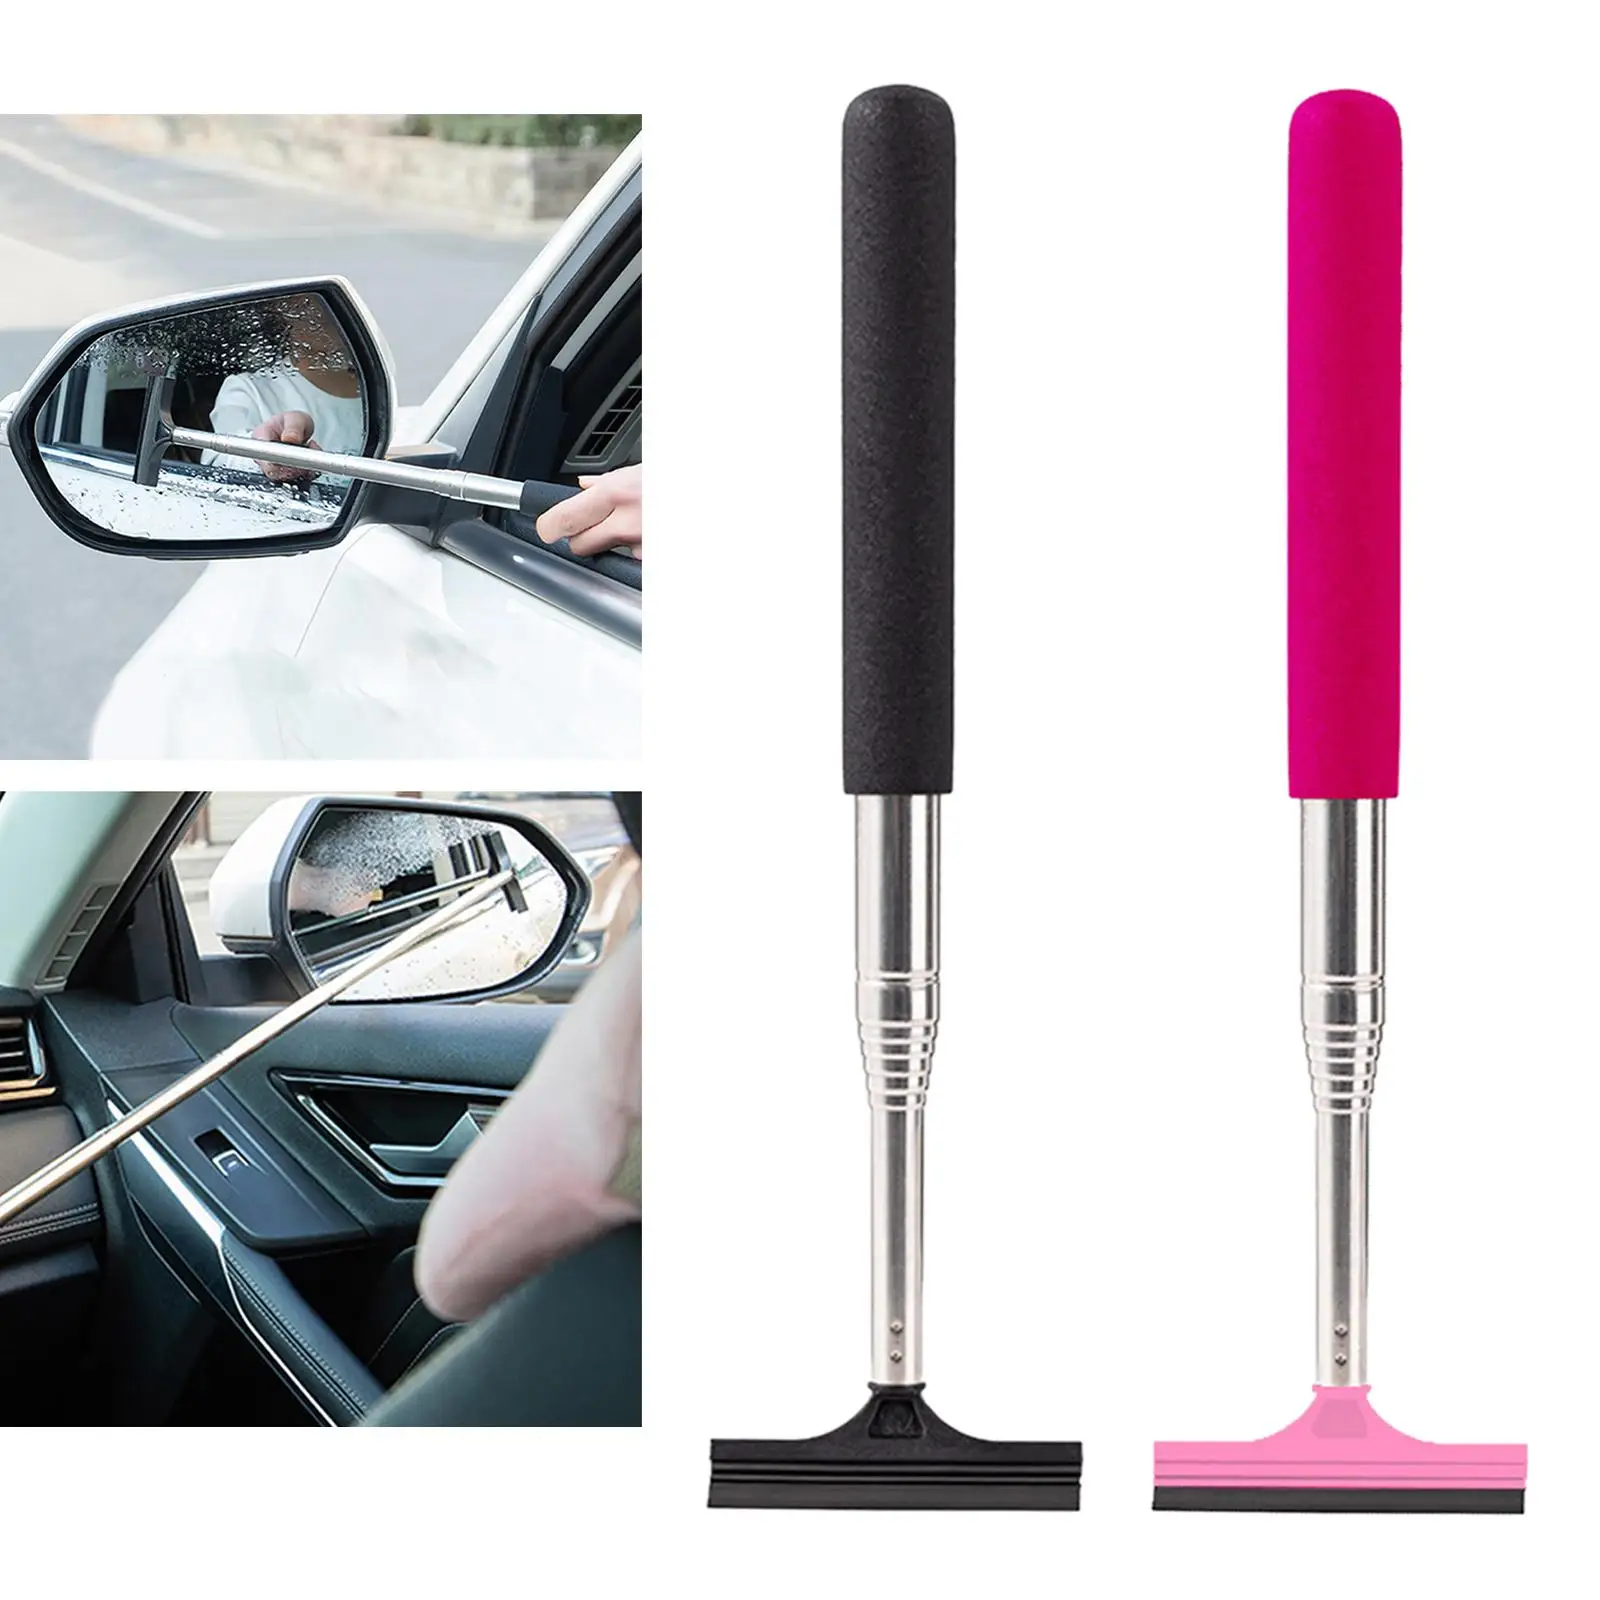 Car Mirror Wiper, Telescopic Long Rod Glass Rain Cleaning Tool for Windshield Glass